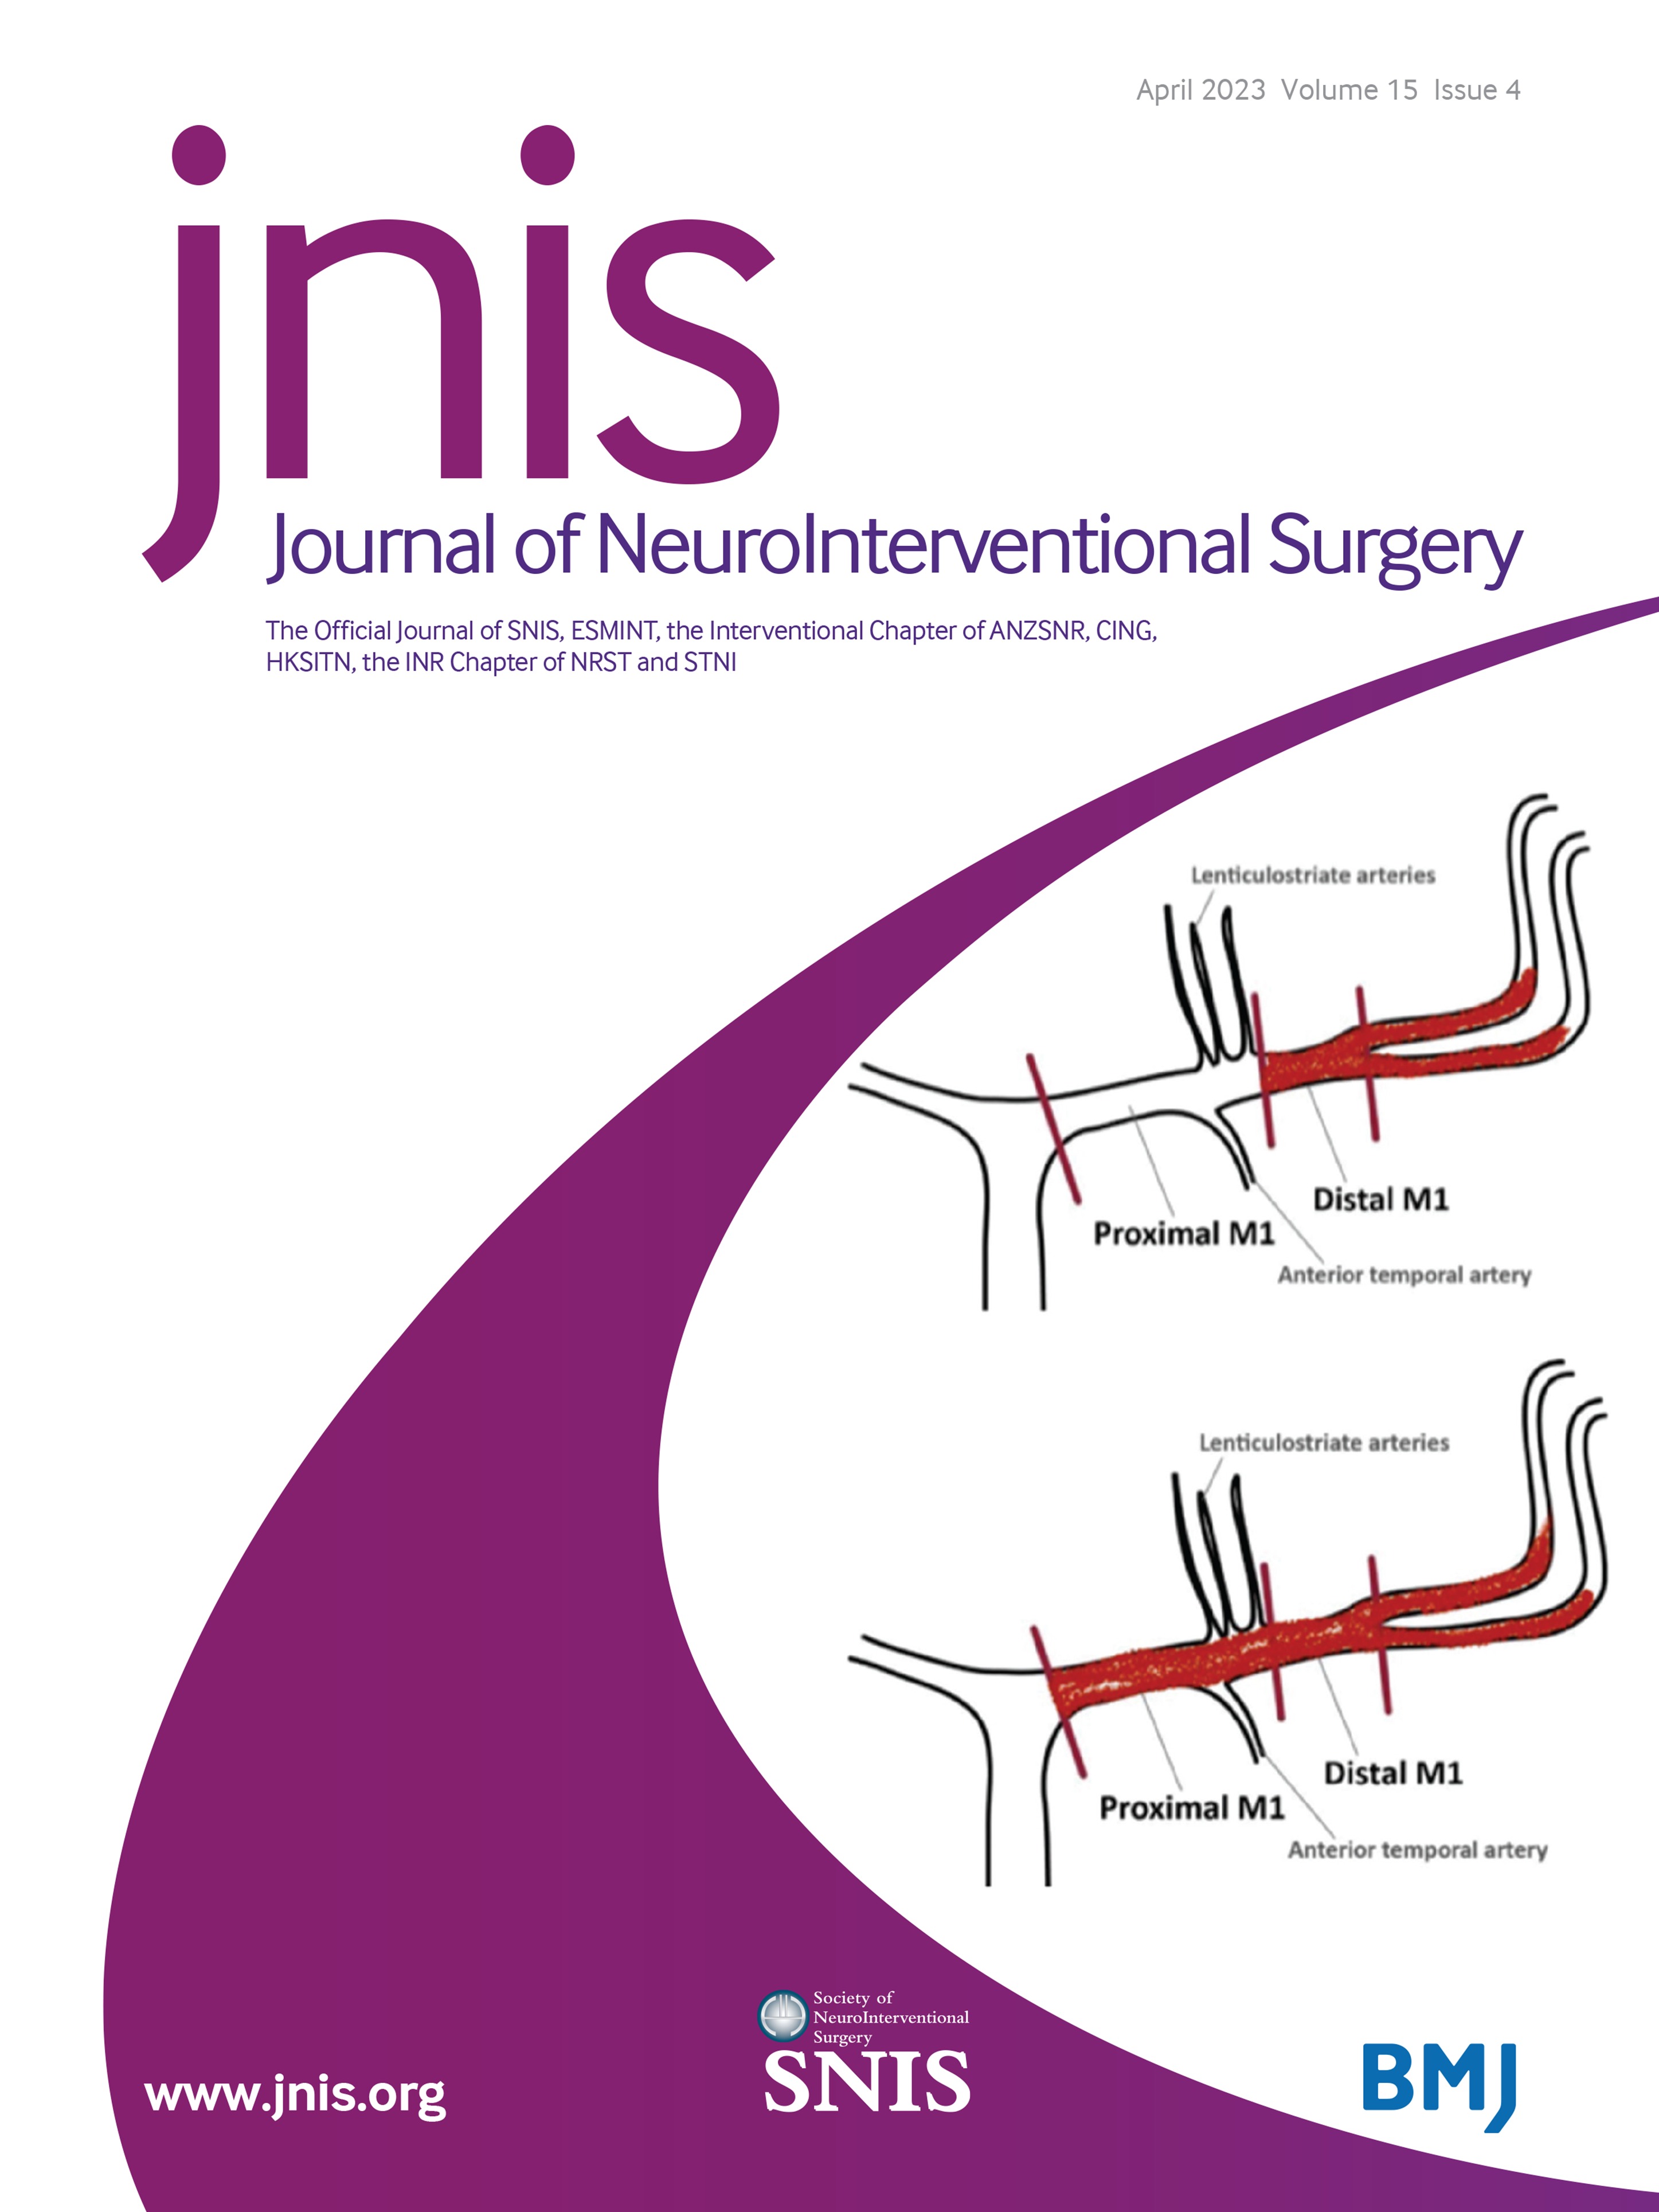 Endovascular coiling versus neurosurgical clipping for treatment of ruptured and unruptured intracranial aneurysms during pregnancy and postpartum period